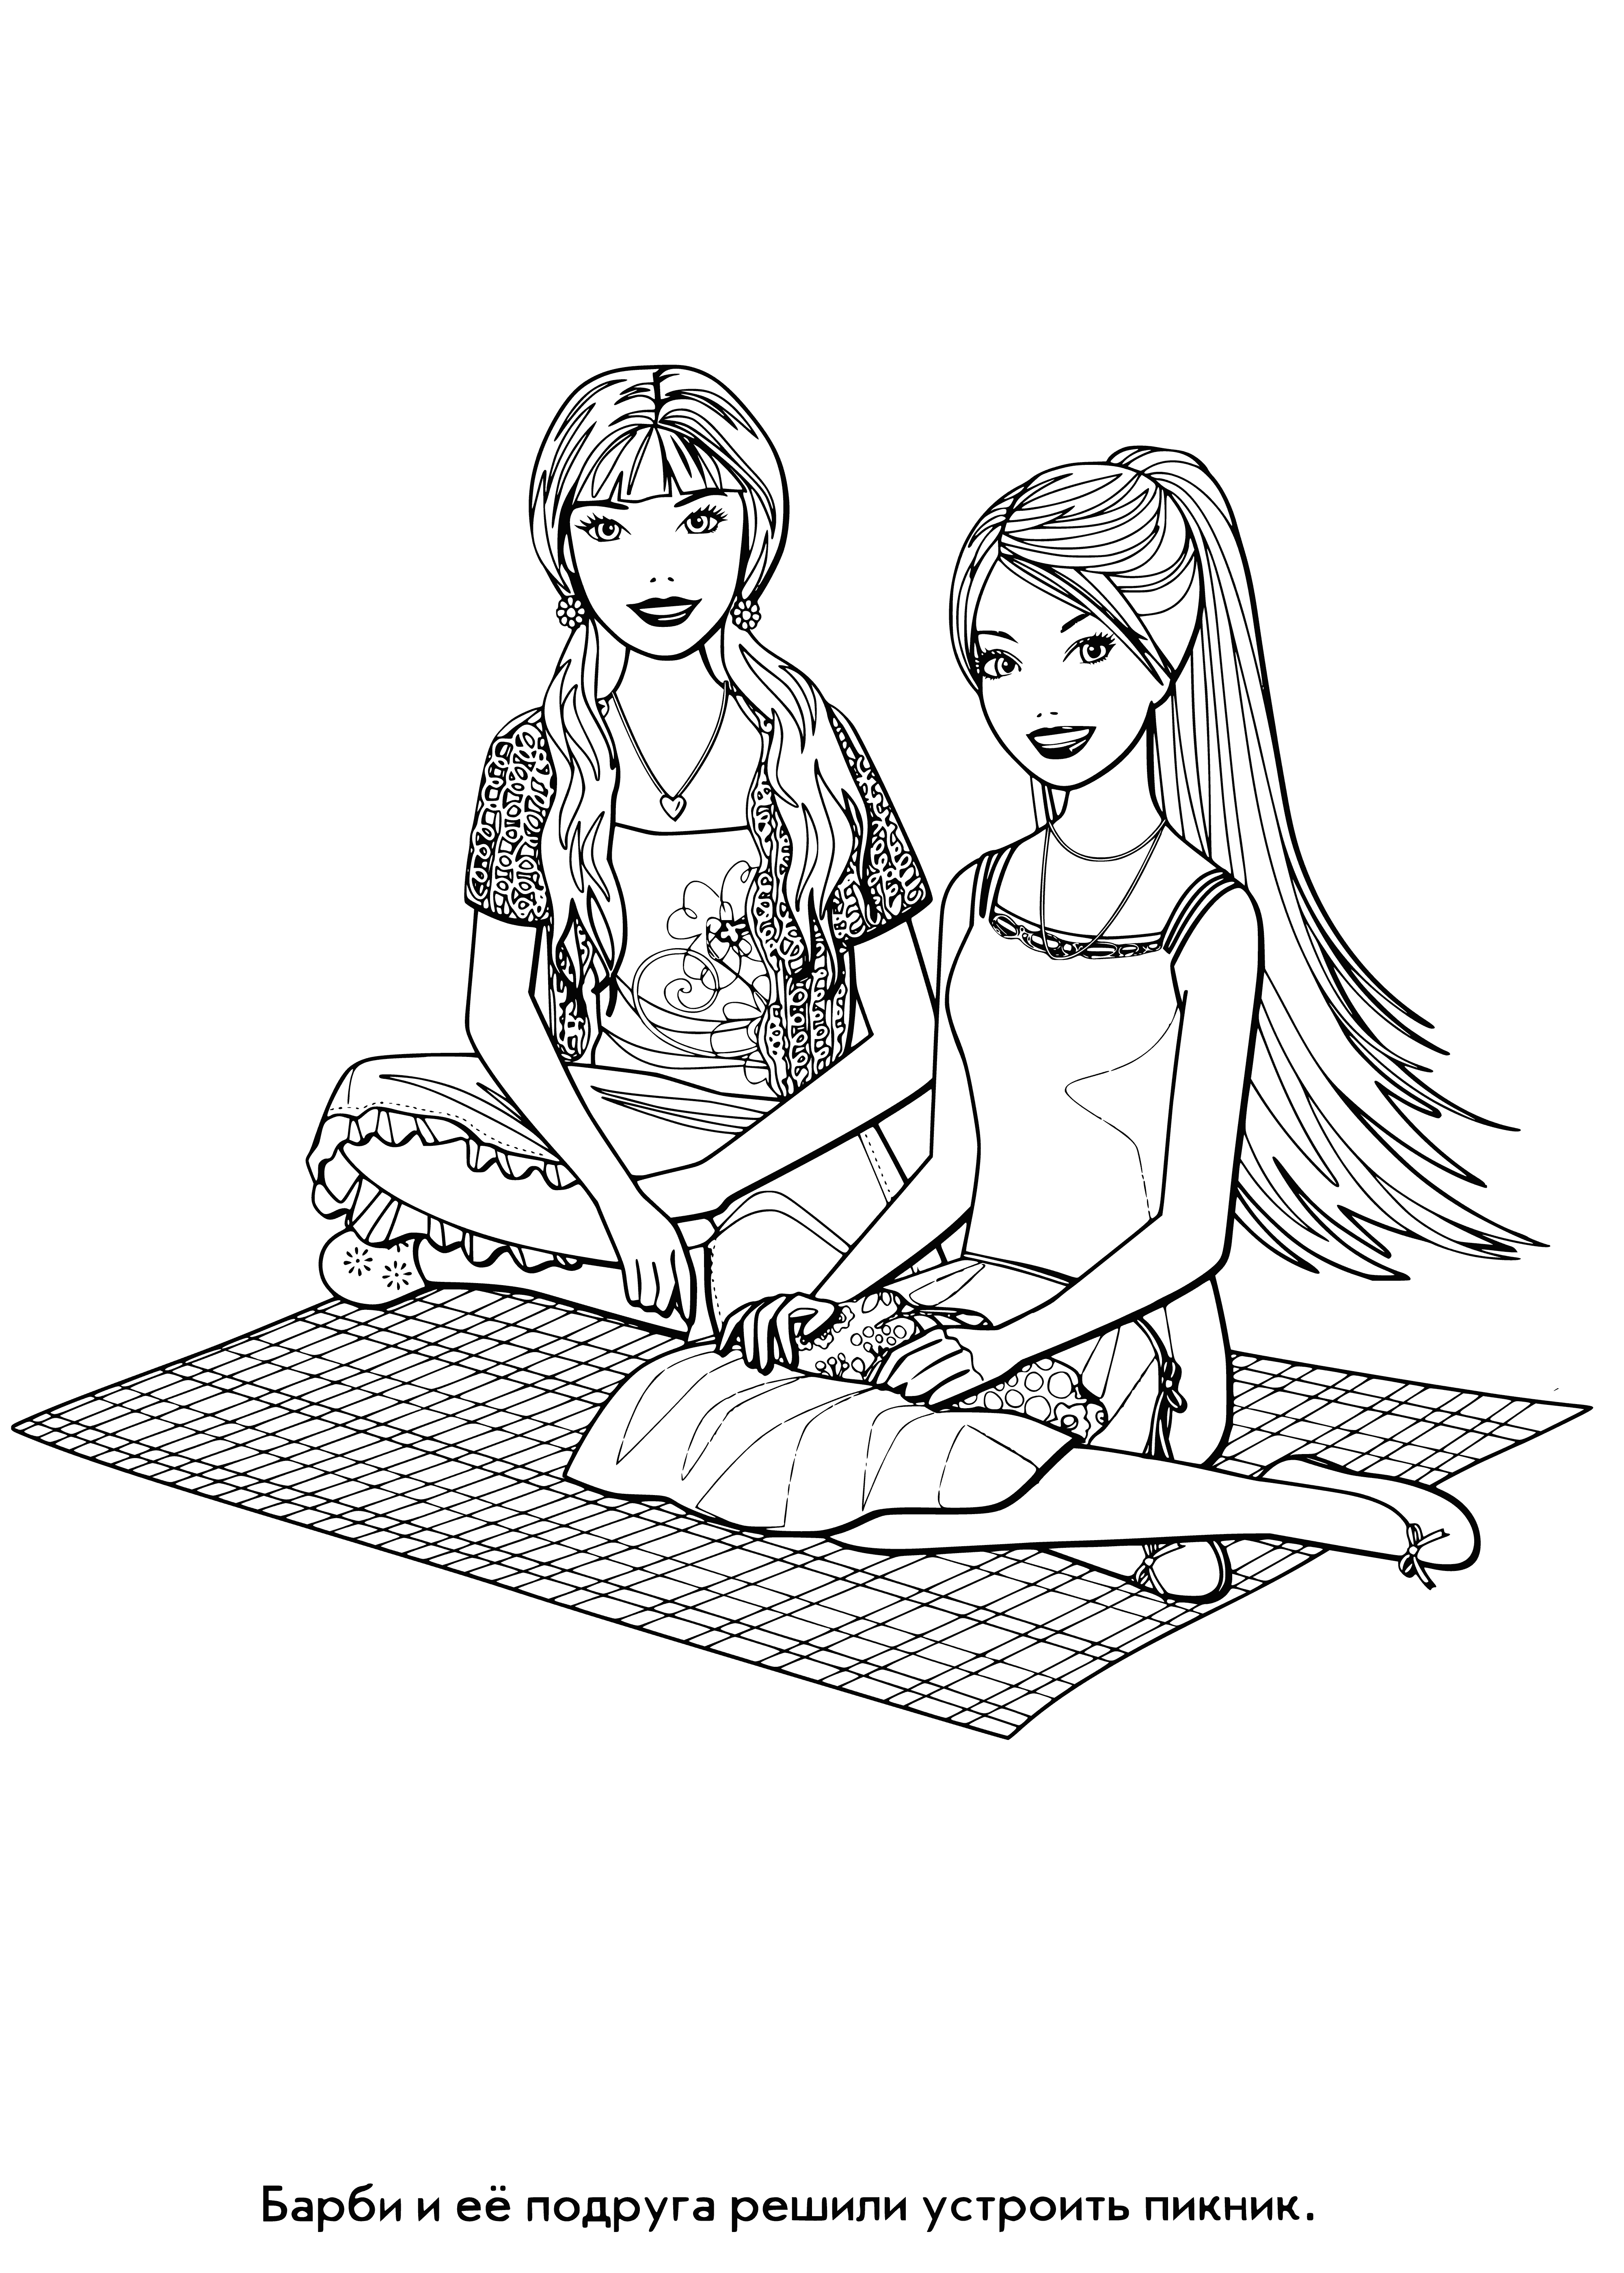 Barbie on a picnic coloring page